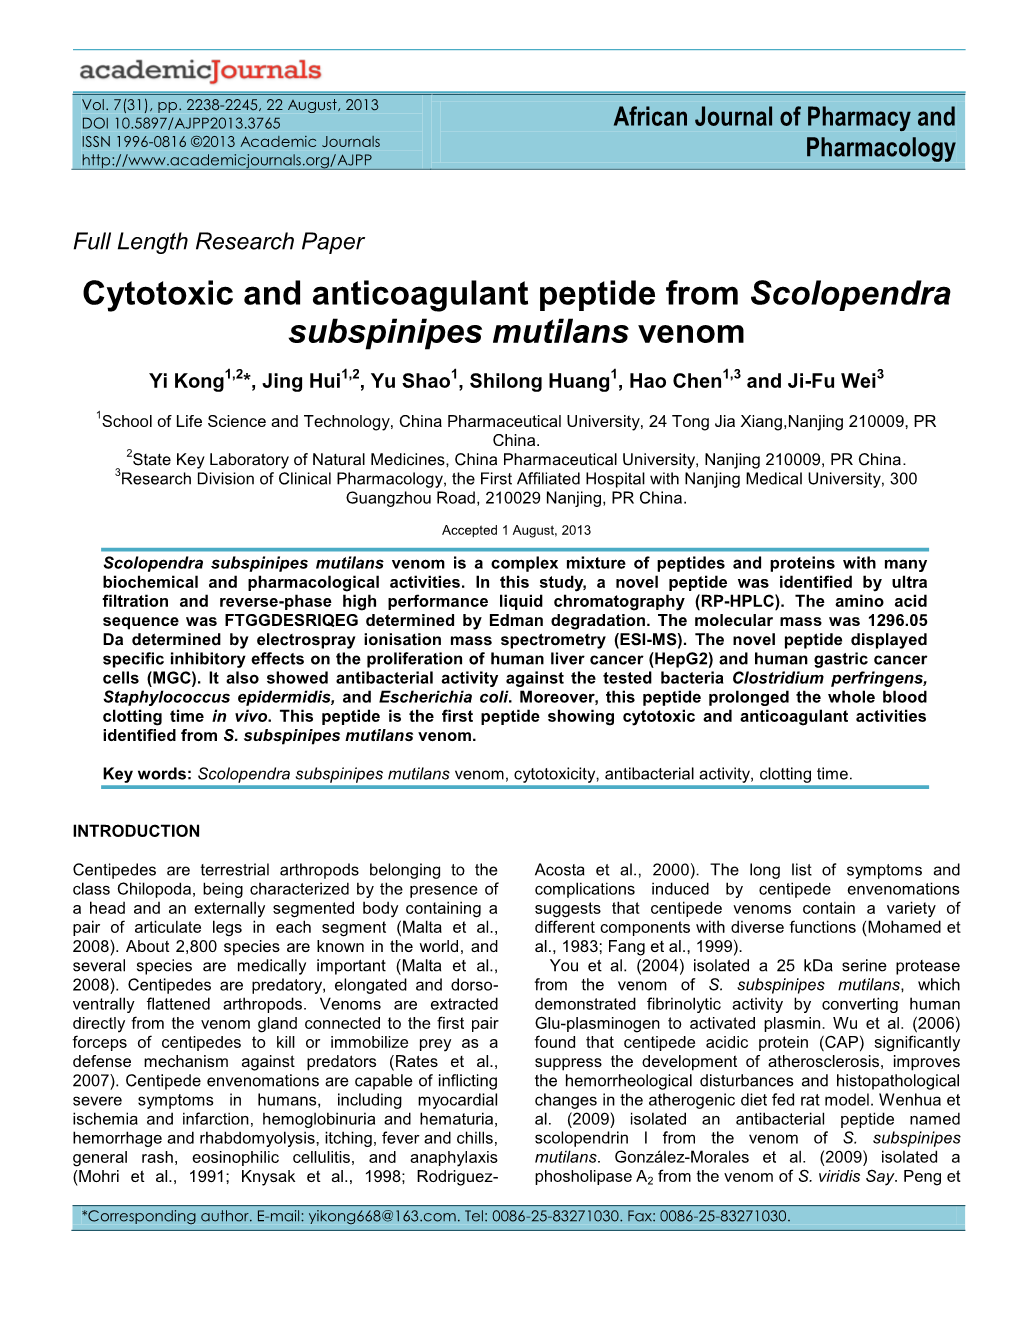 Cytotoxic and Anticoagulant Peptide from Scolopendra Subspinipes Mutilans Venom